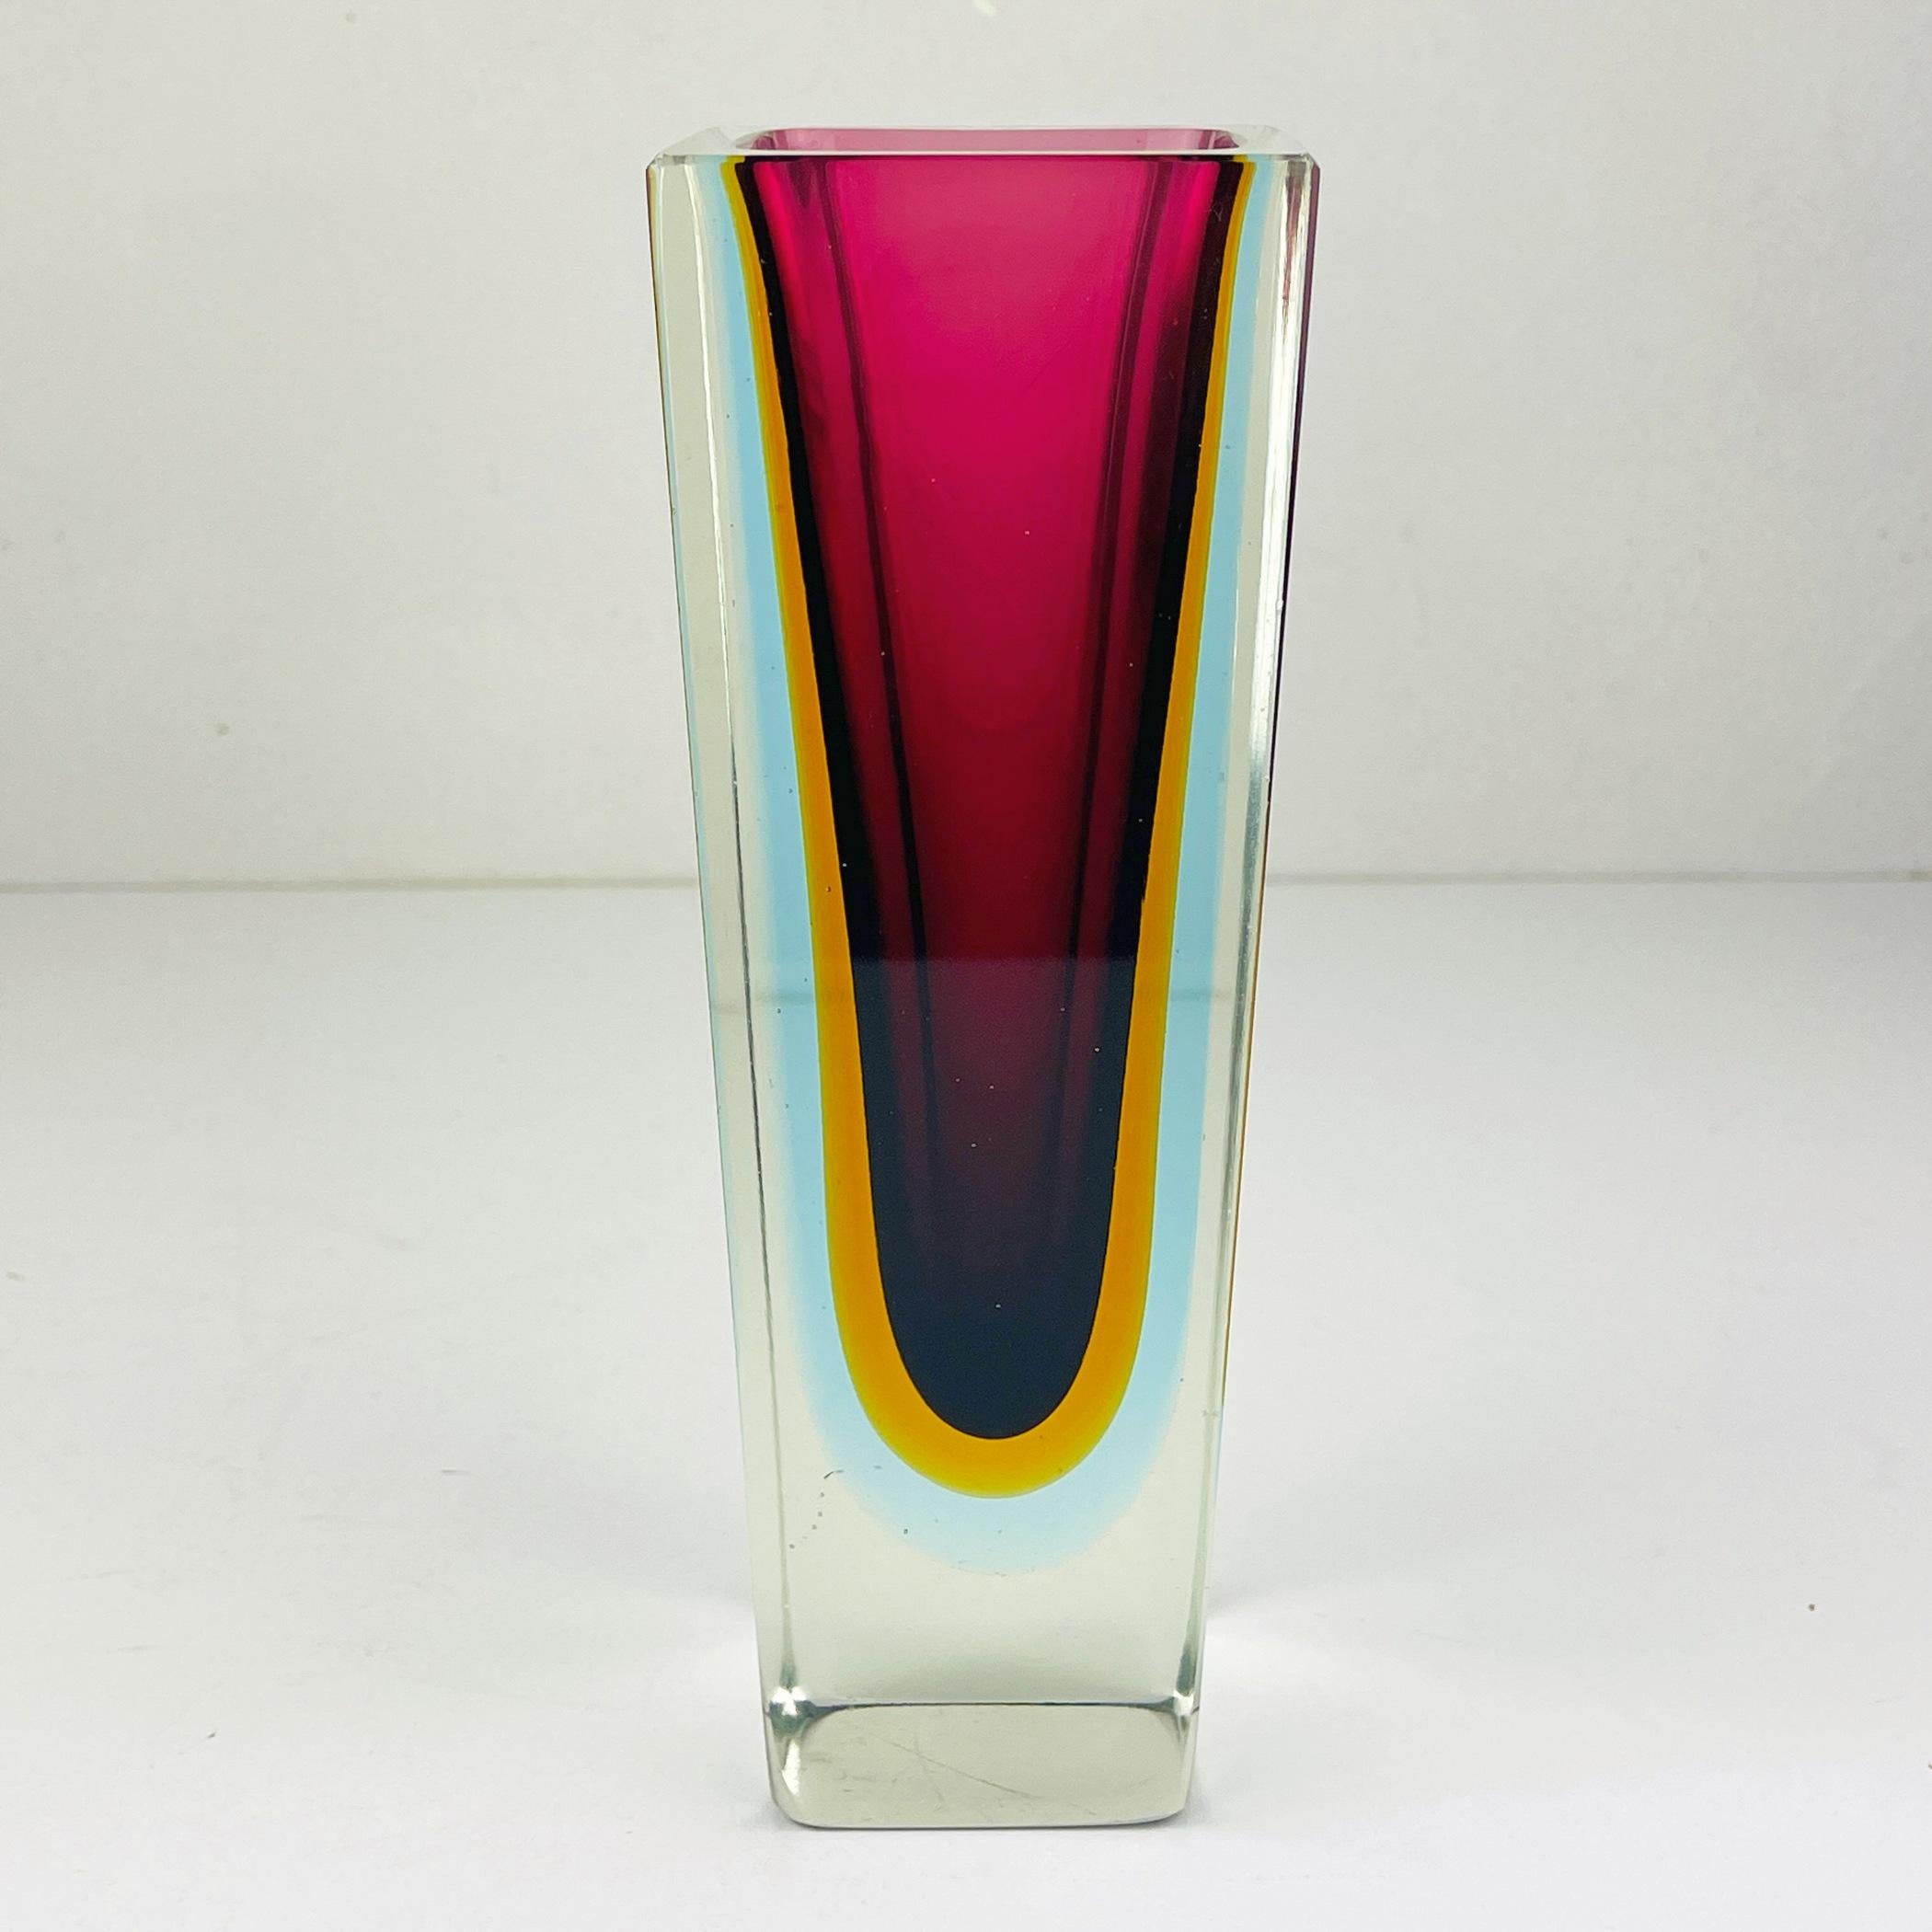 Vintage geometric sommerso murano glass hand-cut vases by Alessandro Mandruzzato style Flavio Poli made in Italy in the 1970s. World-renowned as one of the most prolific and accomplished makers of Murano glass vases and objects, Flavio Poli has